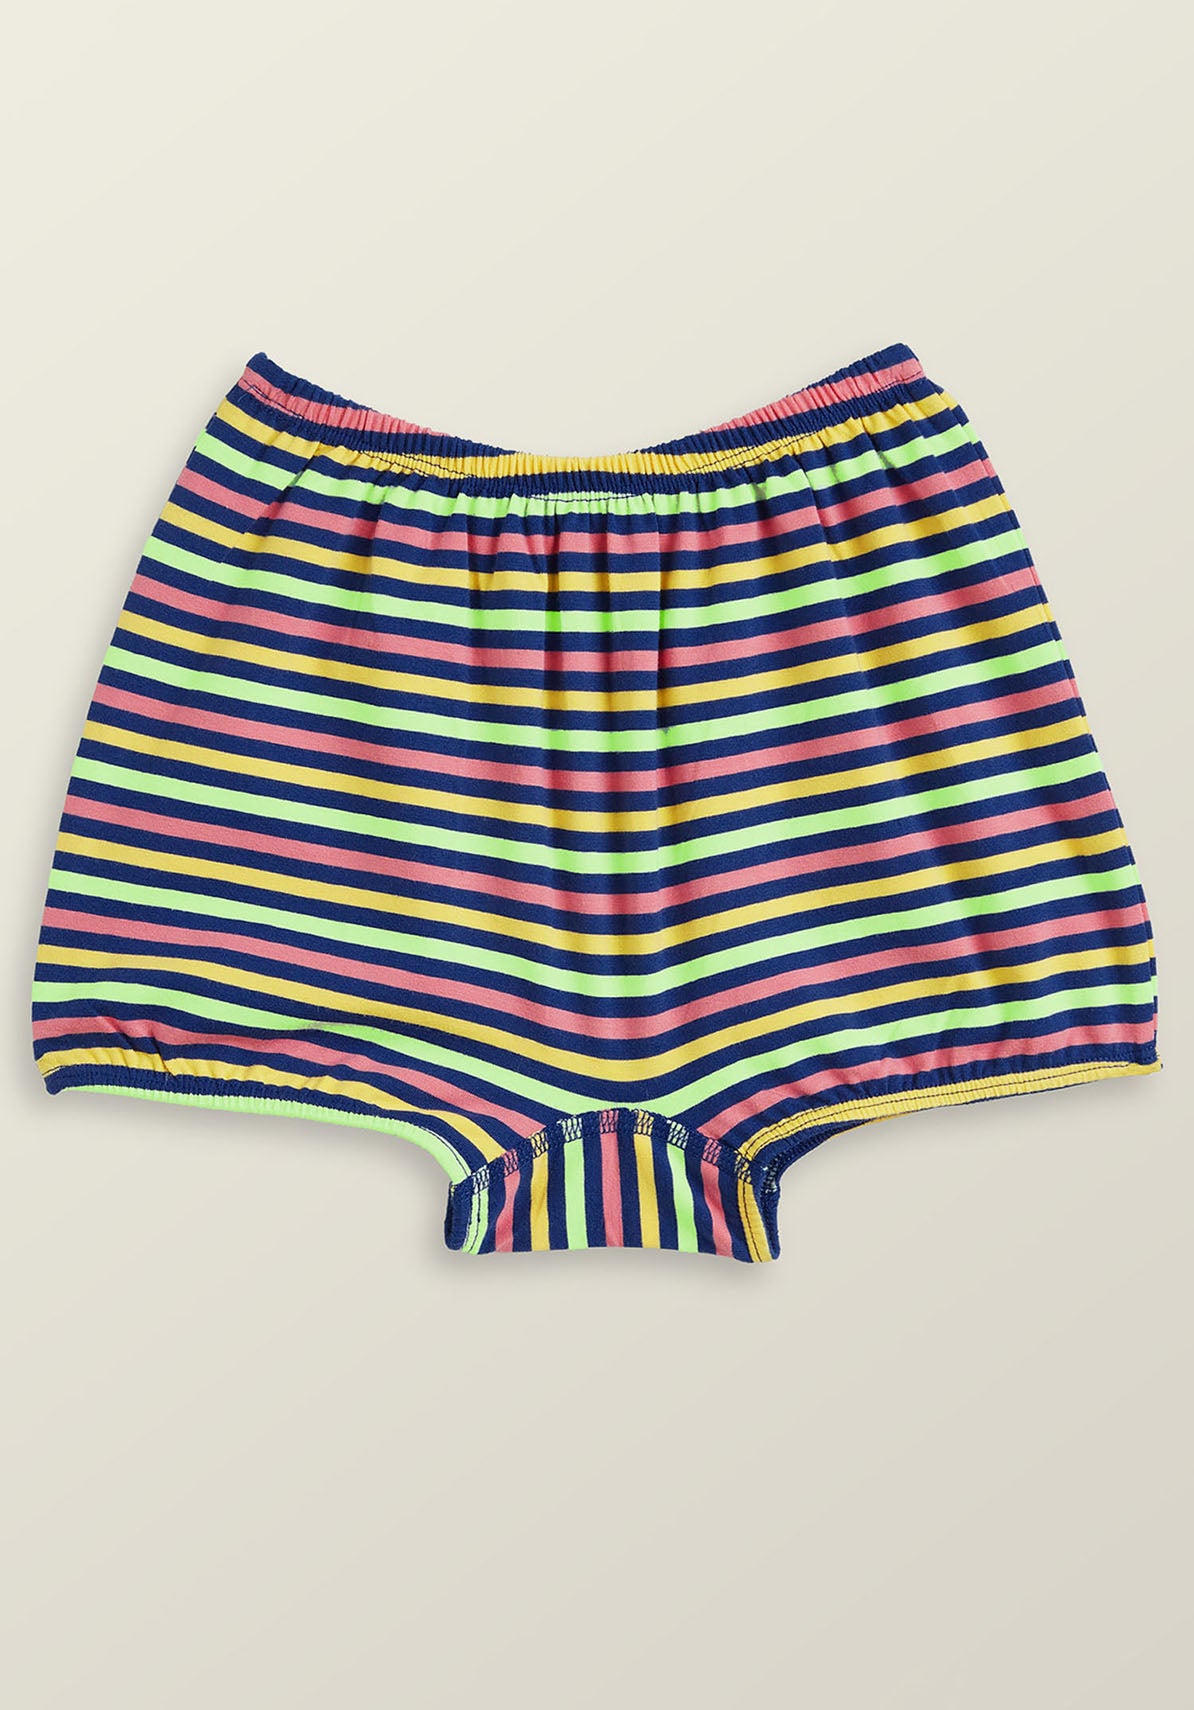 Girls bloomers arcade combed cotton blue - XYLife Kids Wear